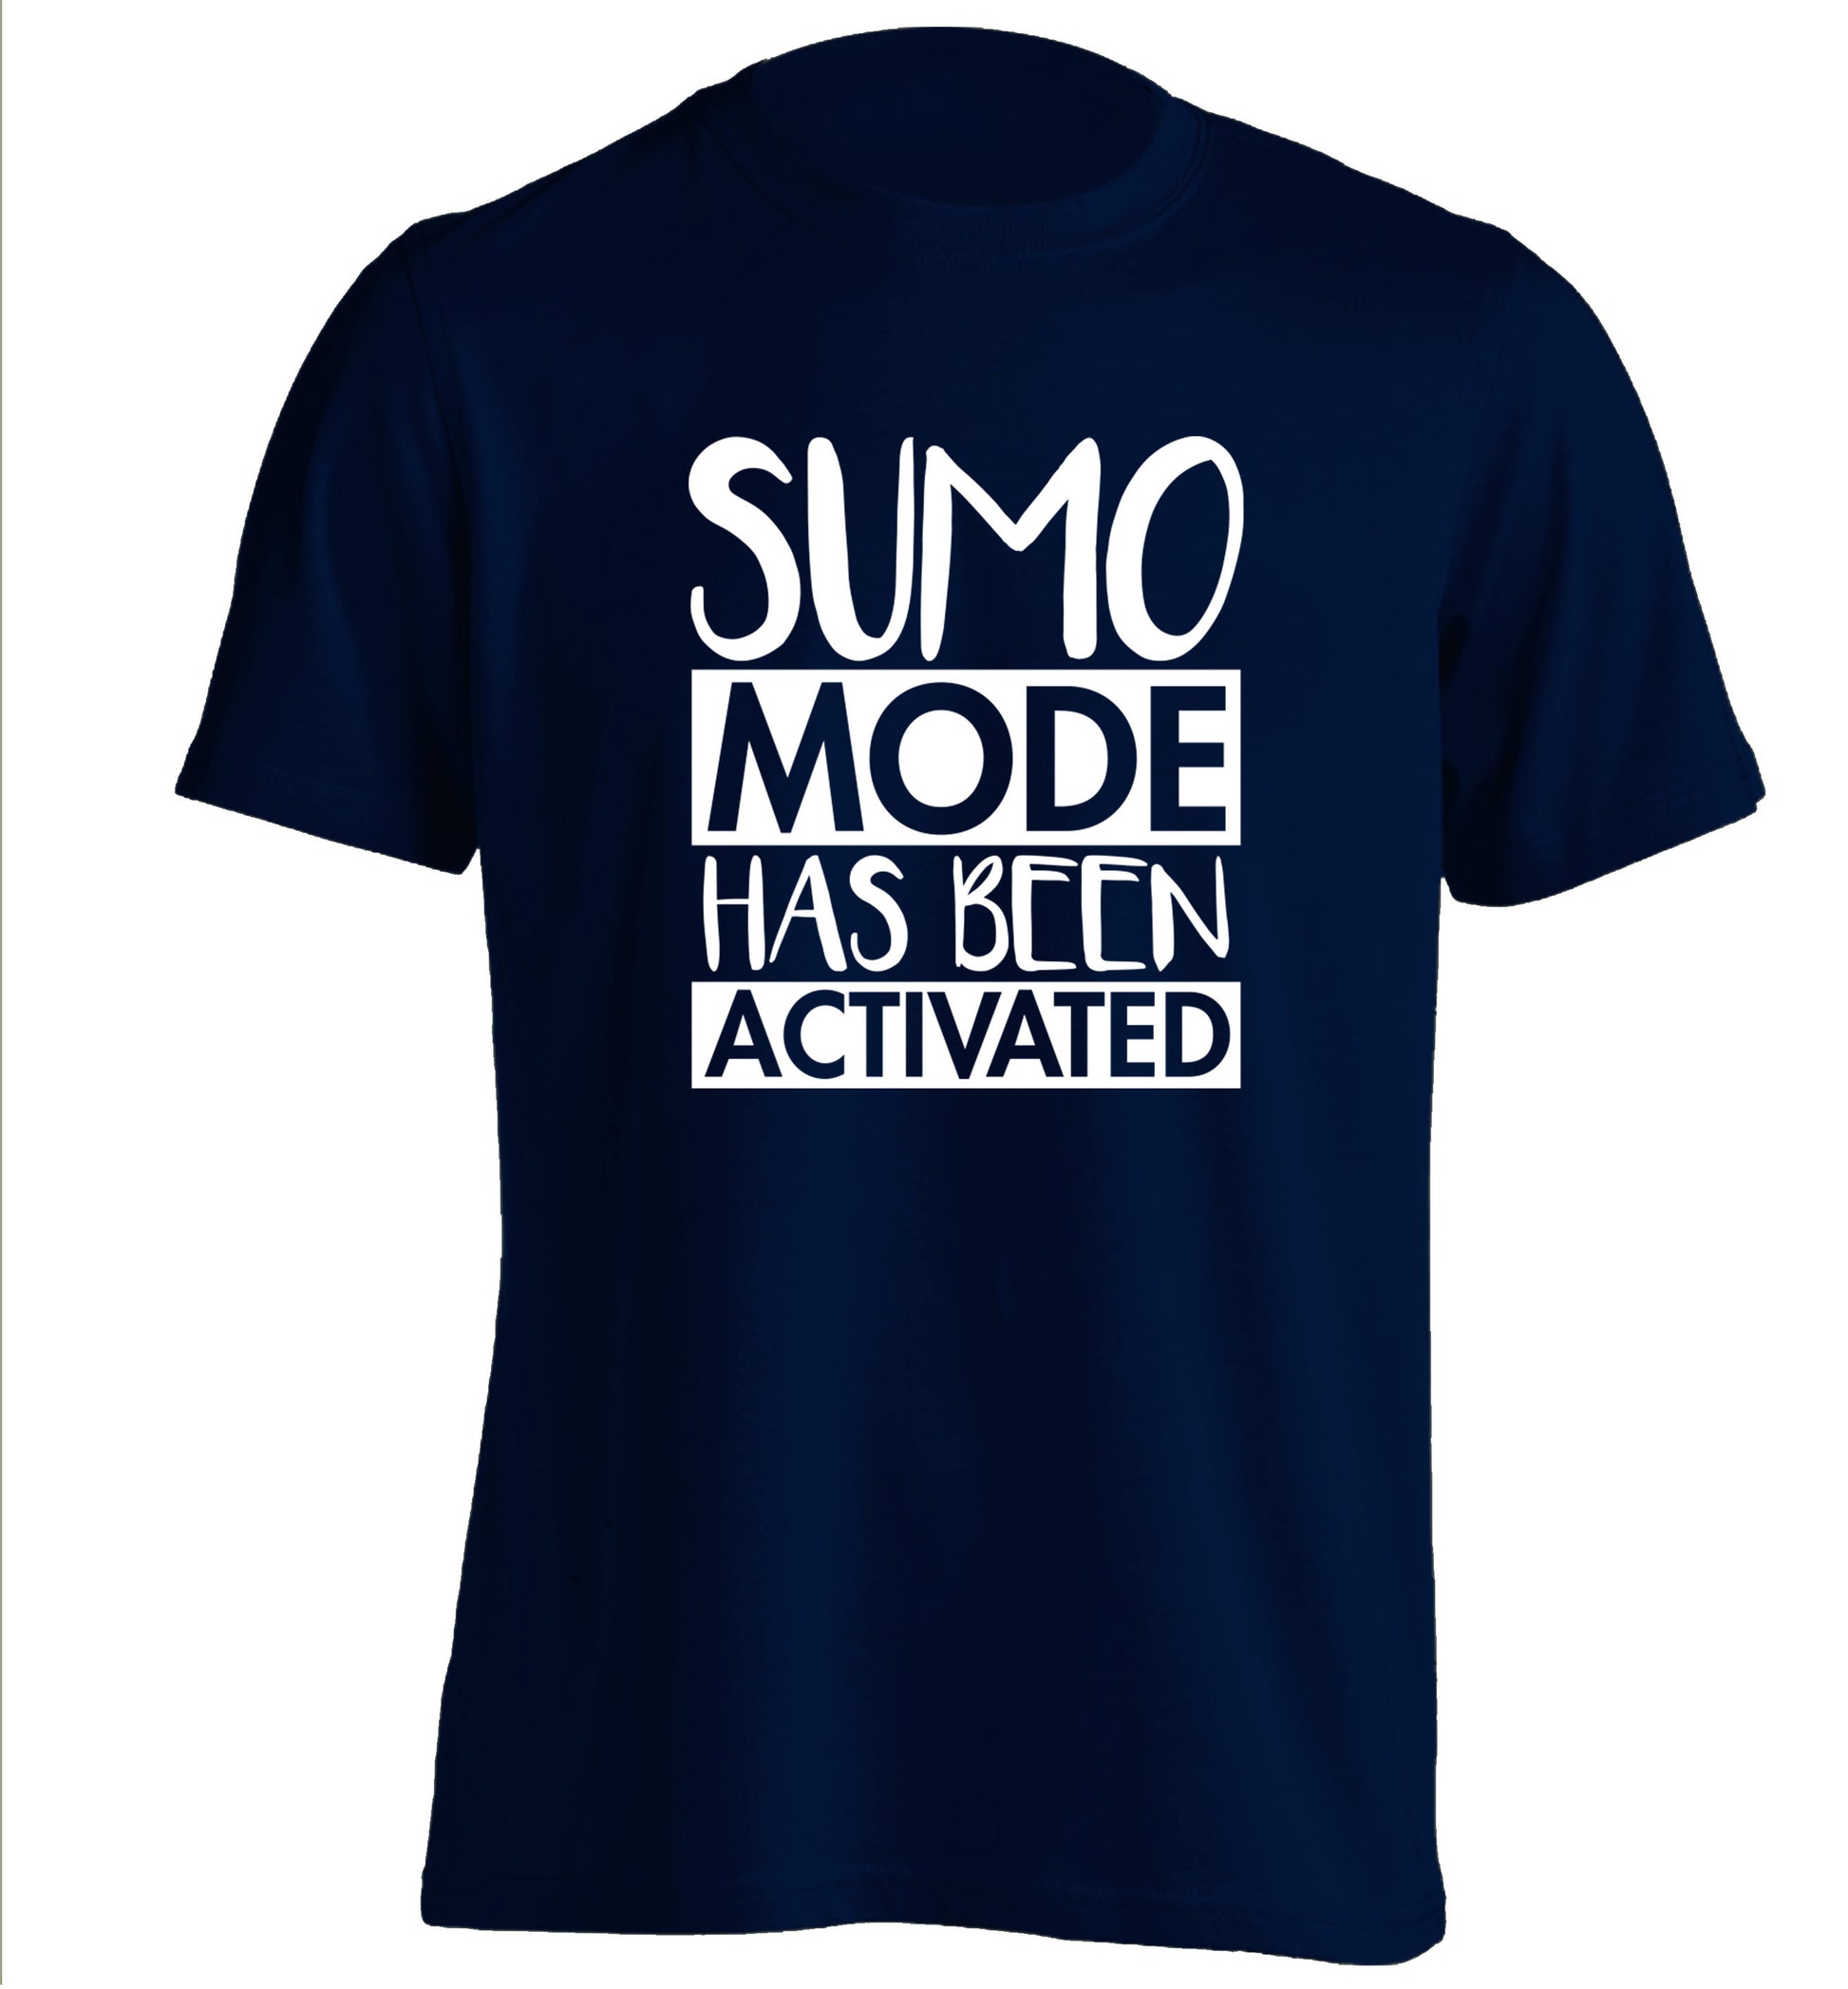 Sumo mode activated adults unisex navy Tshirt 2XL